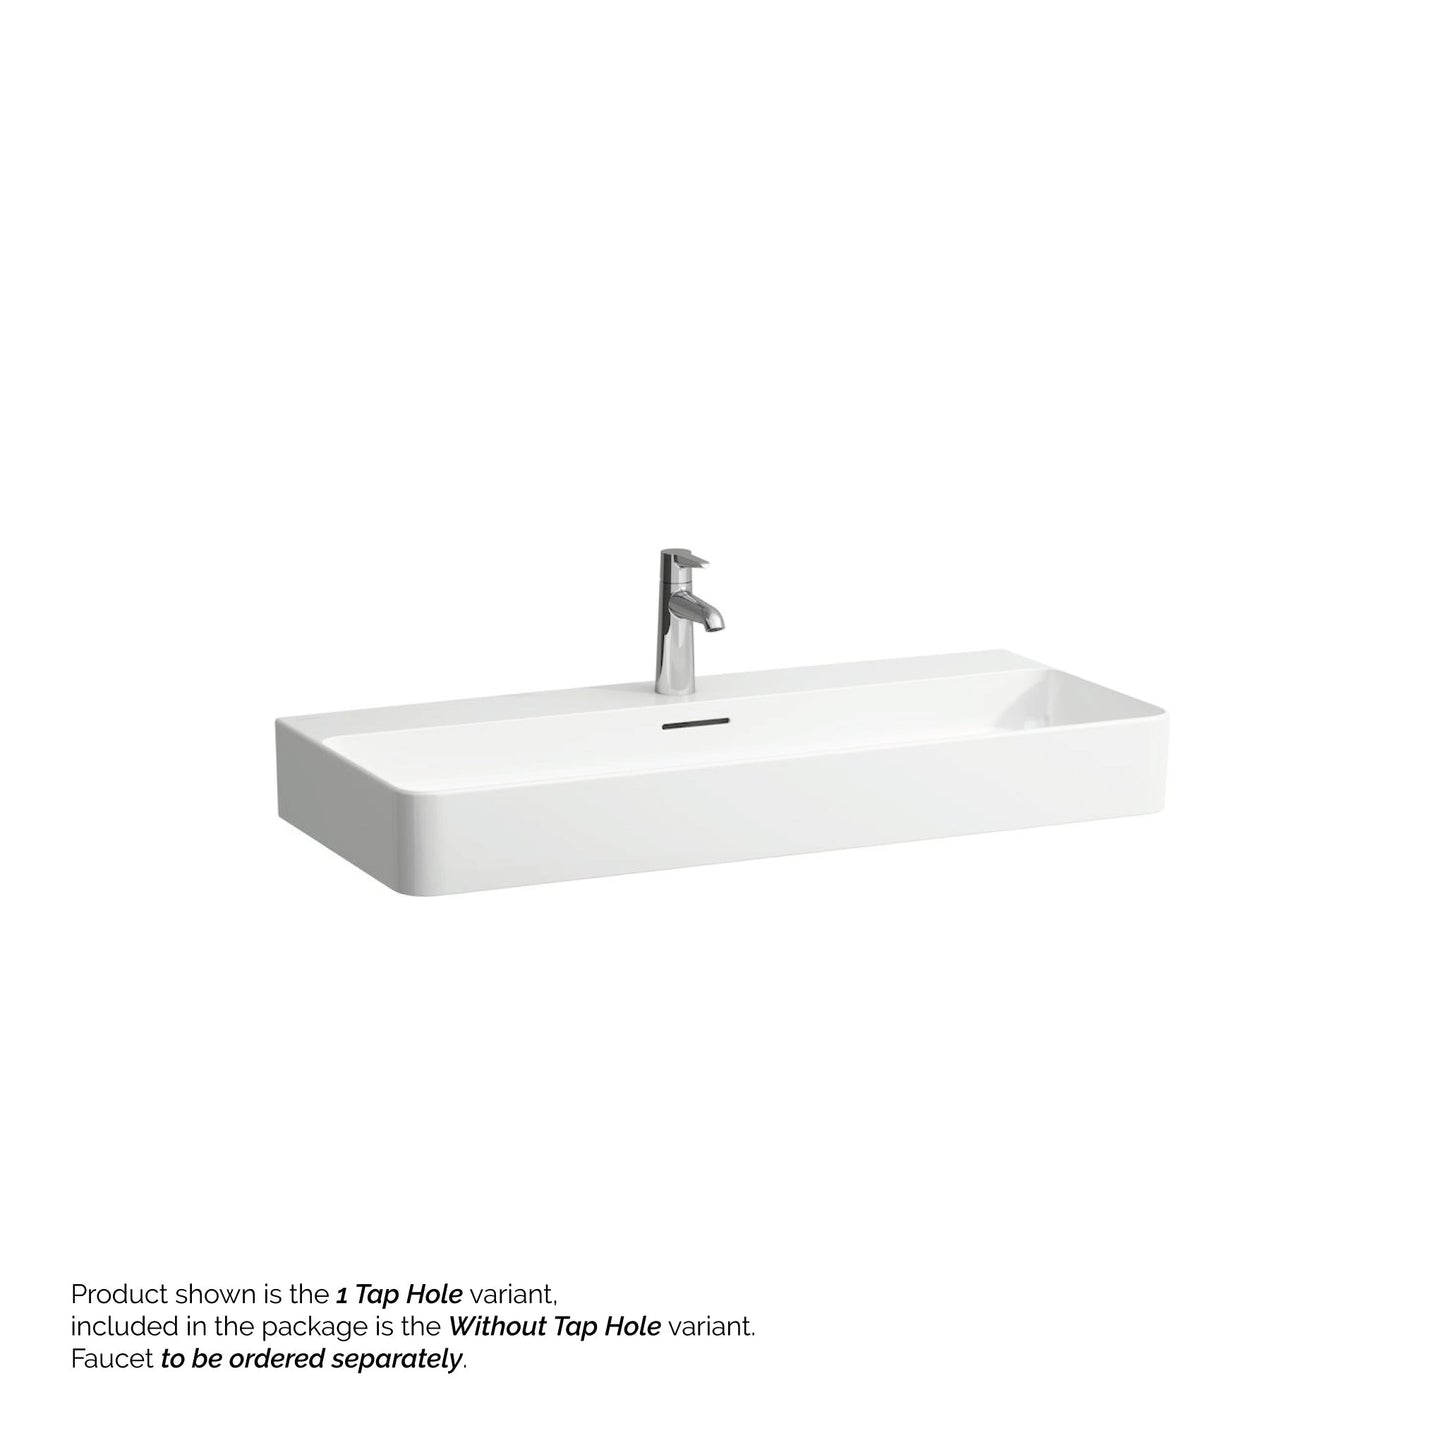 Laufen Val 37" x 17" Matte White Ceramic Countertop Bathroom Sink Without Faucet Hole